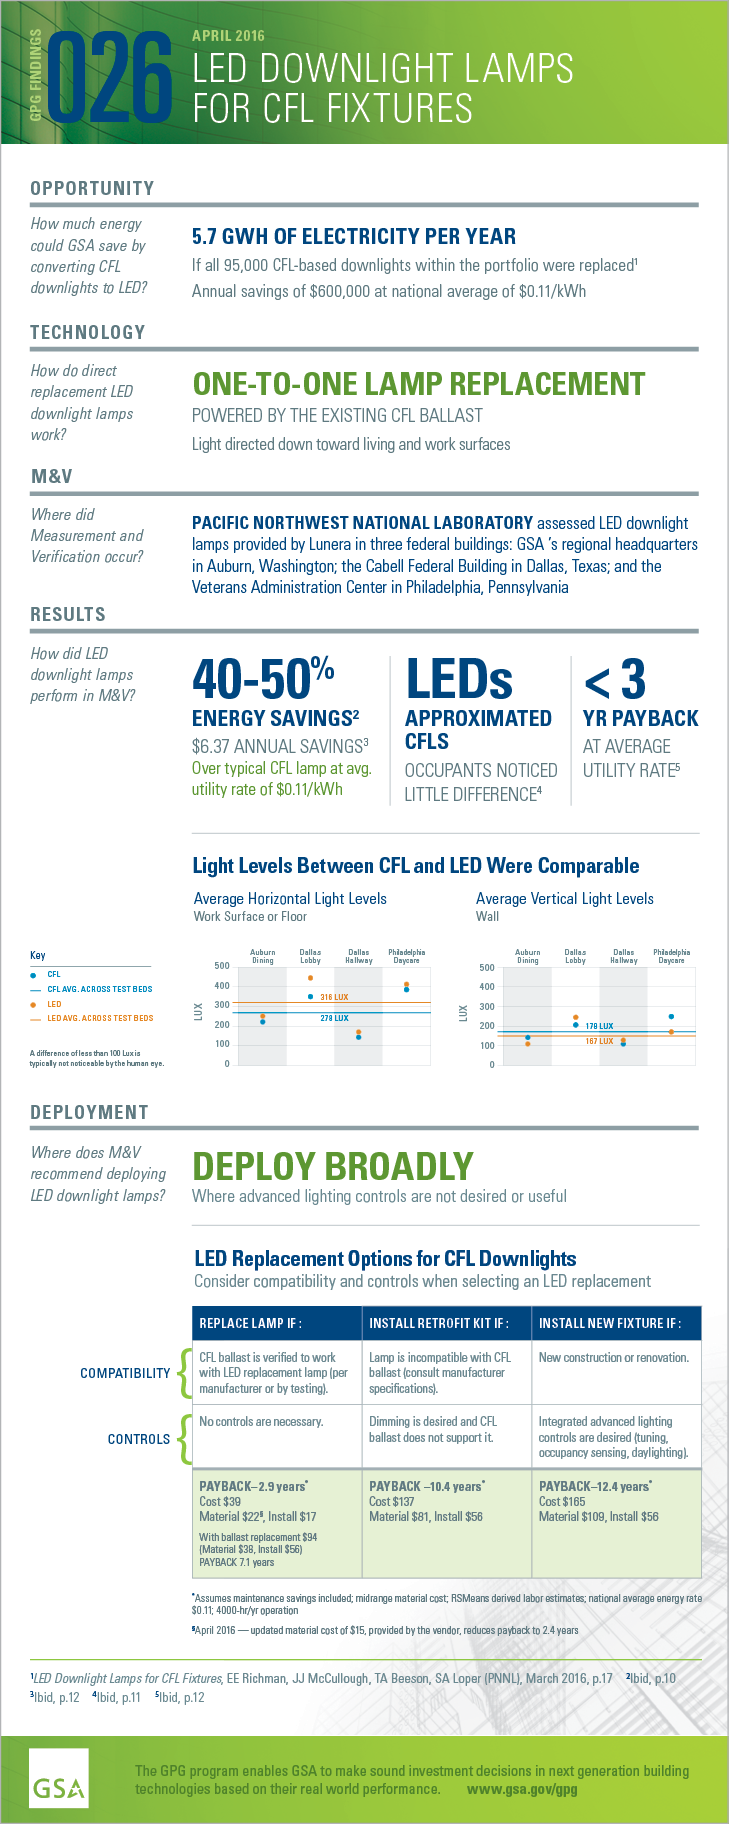 GPG Findings 024, August 2015, LED Fixtures with Integrated Advanced Lighting Controls. Opportunity:How much energycould GSA save by converting CFL downlights to LED? 5.7 GWH OF ELECTRICITY PER YEAR. If all 95,000 CFL-based downlights within the portfolio were replaced. Annual savings of $600,000 at national average of $0.11/kW. Technology: How do directreplacement LED downlight lamps work? ONE-TO-ONE LAMP REPLACEMENT. POWERED BY THE EXISTING CFL BALLAST. Light directed down toward living and work surfaces. Measurement and Verification. Where did M and V occur? PACIFIC NORTHWEST NATIONAL LABORATORY assessed LED downlight lamps in three federal buildings: GSA ’s regional headquarters in Auburn,Washington; the Cabell Federal Building in Dallas, Texas; and the Veterans Administration Center in Philadelphia, Pennsylvania. Results: How did LED downlight lamps perform in M&V? 40-50% ENERGY SAVINGS. $6.37 ANNUAL SAVINGS Over typical CFL lamp at avg.utility rate of $0.11/kWh.LEDs APPROXIMATED CFLS OCCUPANTS NOTICED LITTLE DIFFERENCE.< 3 YR PAYBACK AT AVERAGE UTILITY RATE. Light Levels Between CFL and LED Were Comparable.Deployment: Where does M&V recommend deploying LED downlight lamps? DEPLOY BROADLY. Where advanced lighting controls are not desired or useful.LED Replacement Options for CFL DownlightsConsider compatibility and controls when selecting an LED replacement.REPLACE LAMP IF:CFL ballast is verified to workwith LED replacement lamp (per manufacturer or by testing). No controls are necessary. PAYBACK– 2.9 years*Cost $39. Material $22§, Install $17. With ballast replacement $94 (Material $38, Install $56. PAYBACK 7.1 years. INSTALL RETROFIT KIT IF :Lamp is incompatible with CFL ballast (consult manufacturer specifications).Dimming is desired and CFLballast does not support it.PAYBACK –10.4 years*. Cost $137. Material $81, Install $56.INSTALL NEW FIXTURE IF : New construction or renovation.Integrated advanced lighting controls are desired (tuning, occupancy sensing, daylighting).PAYBACK–12.4 years. Cost $165. Material $109, Install $56.